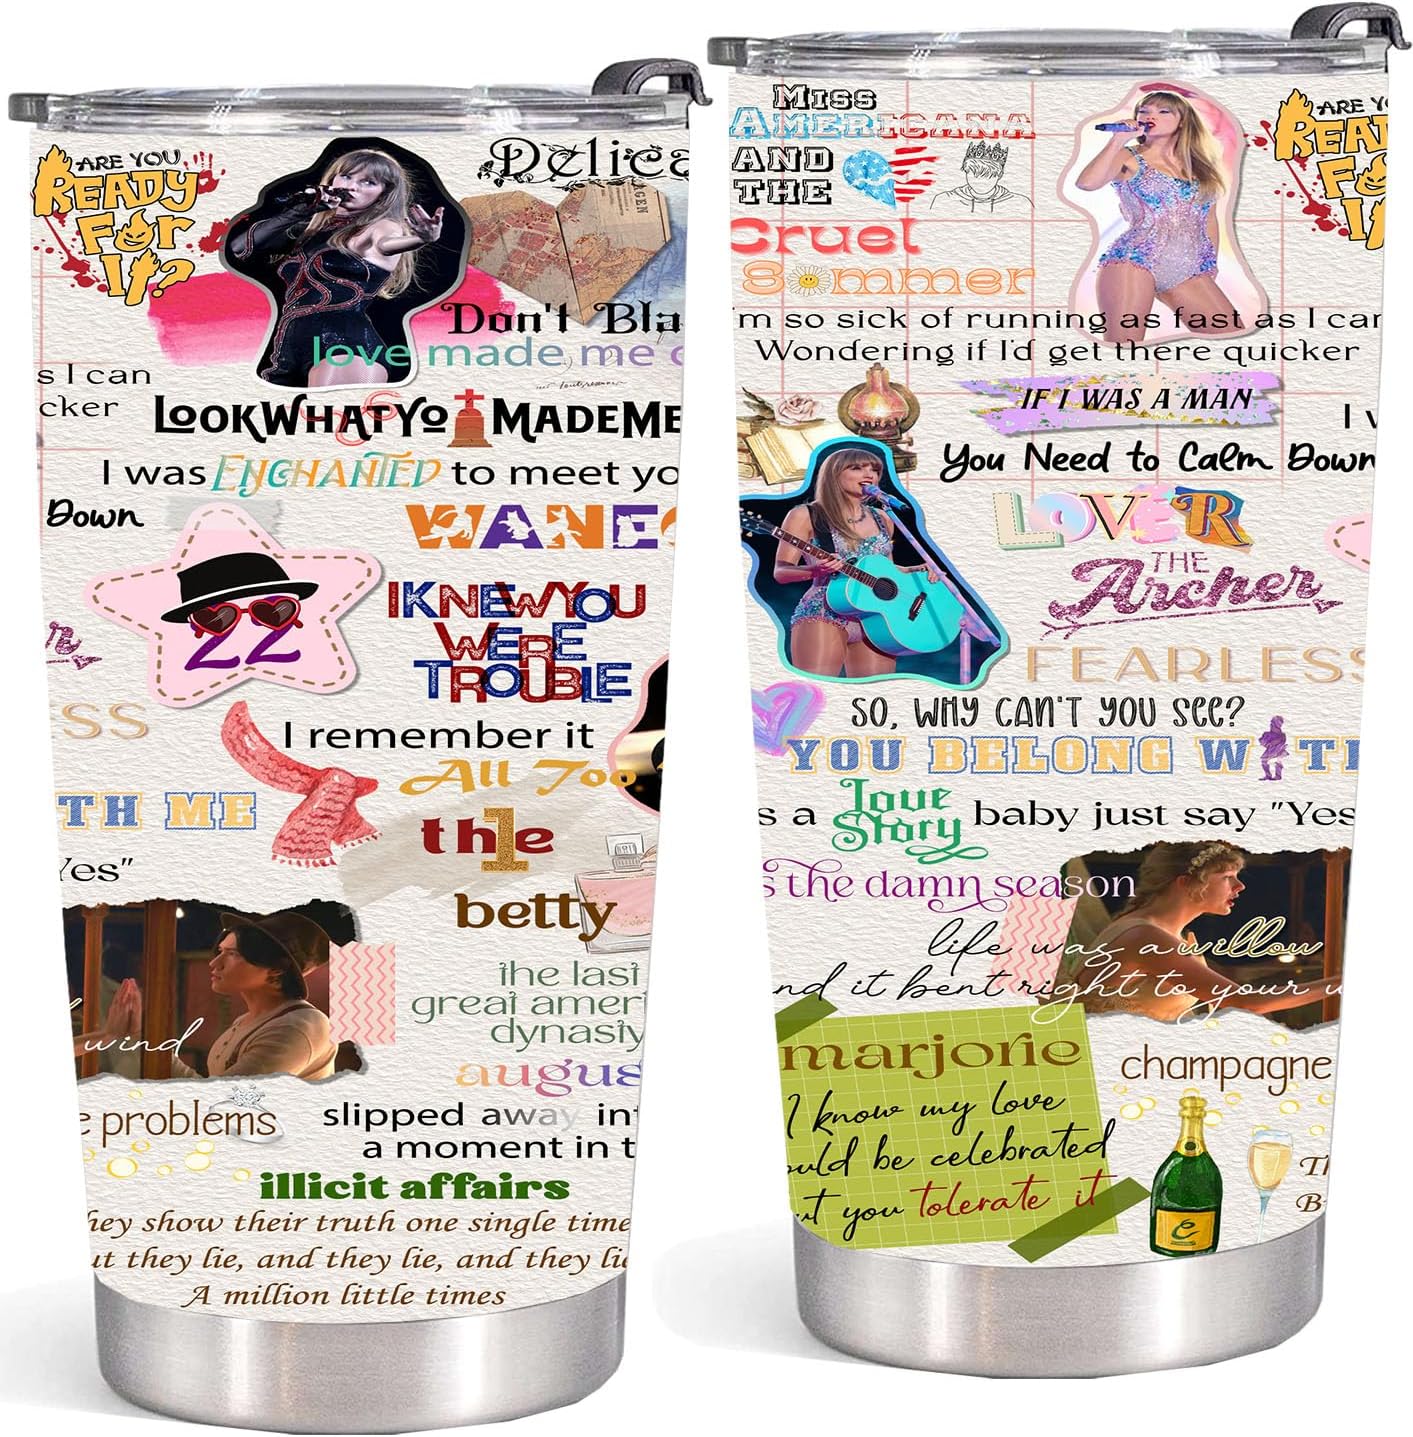 Swift Coffee Cup - Swiftea Gifts, Music Lovers Gifts for Singer Fans